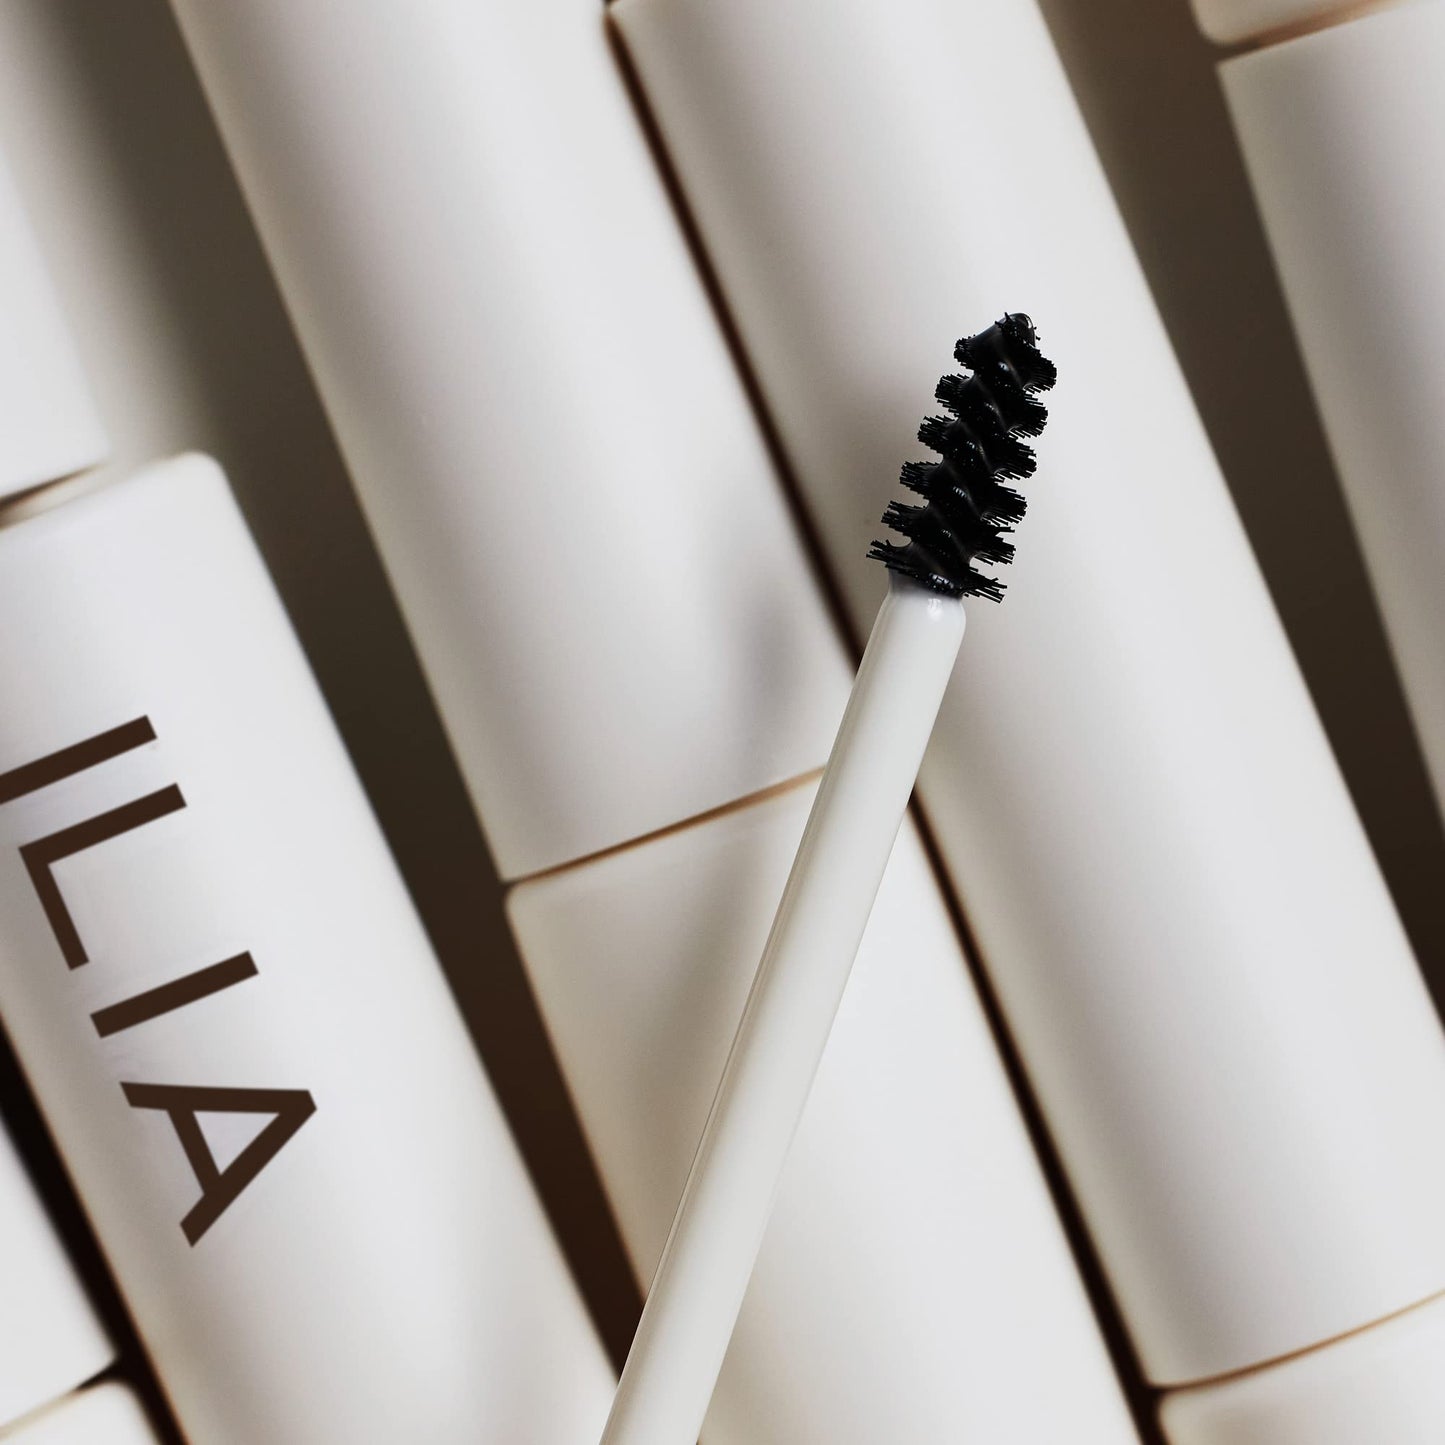 ILIA - In Frame Brow Gel | Non-Toxic, Vegan, Cruelty-Free, Clean Makeup (Universal Clear)